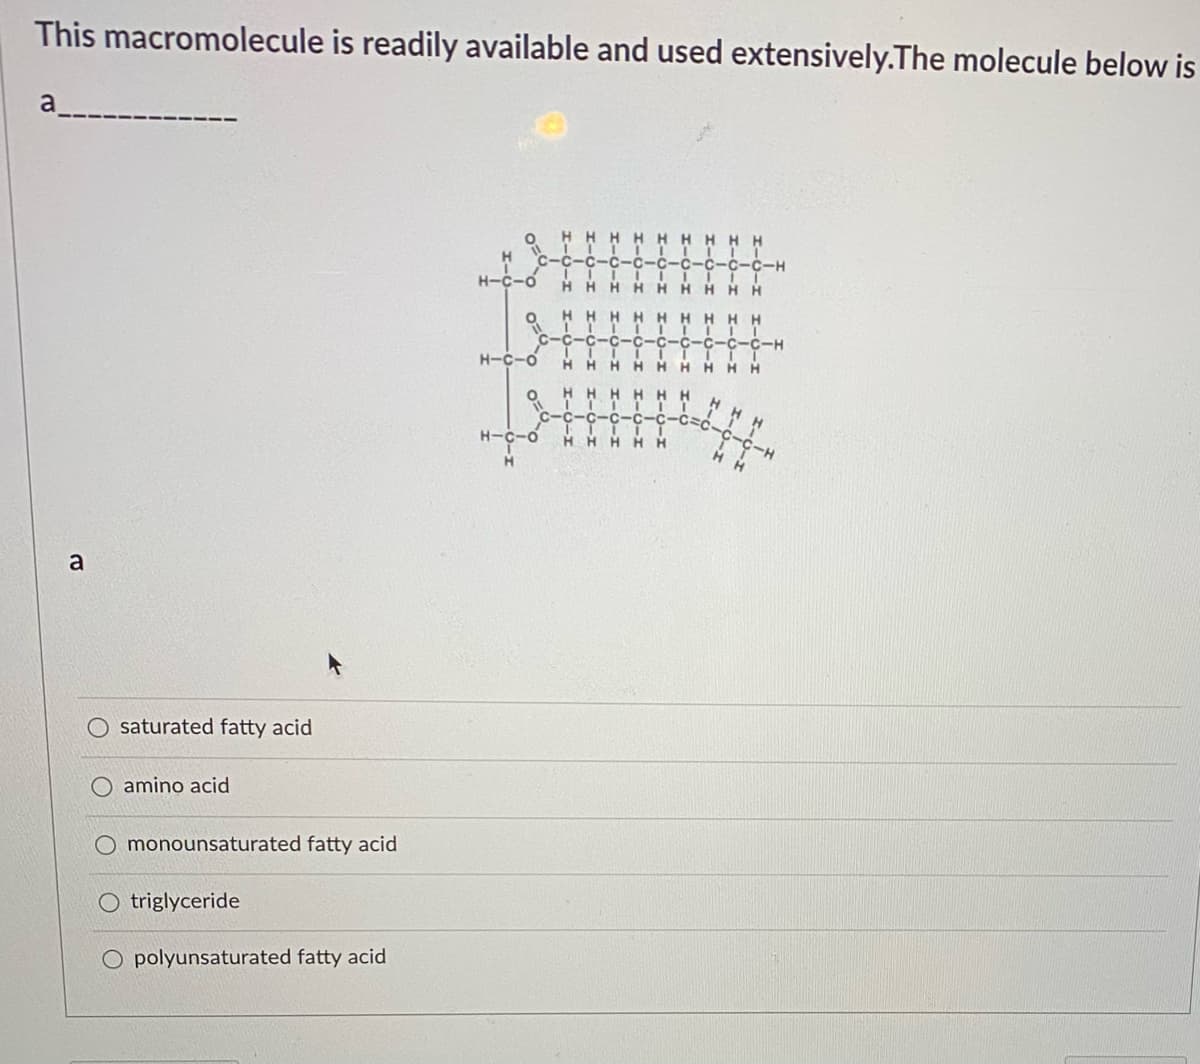 This macromolecule is readily available and used extensively.The molecule below is
a
H H
HHH
C-H
H-C-o
HHHH HHHH
HHHH H H
C-C
-C-C
H-C-o
HHHH H H
H H
HHH
H.
H H
o-0-H
a
saturated fatty acid
amino acid
monounsaturated fatty acid
O triglyceride
O polyunsaturated fatty acid
I-o-z
I-O-I I-O-I
I-0-I I-O-I I-0-I
